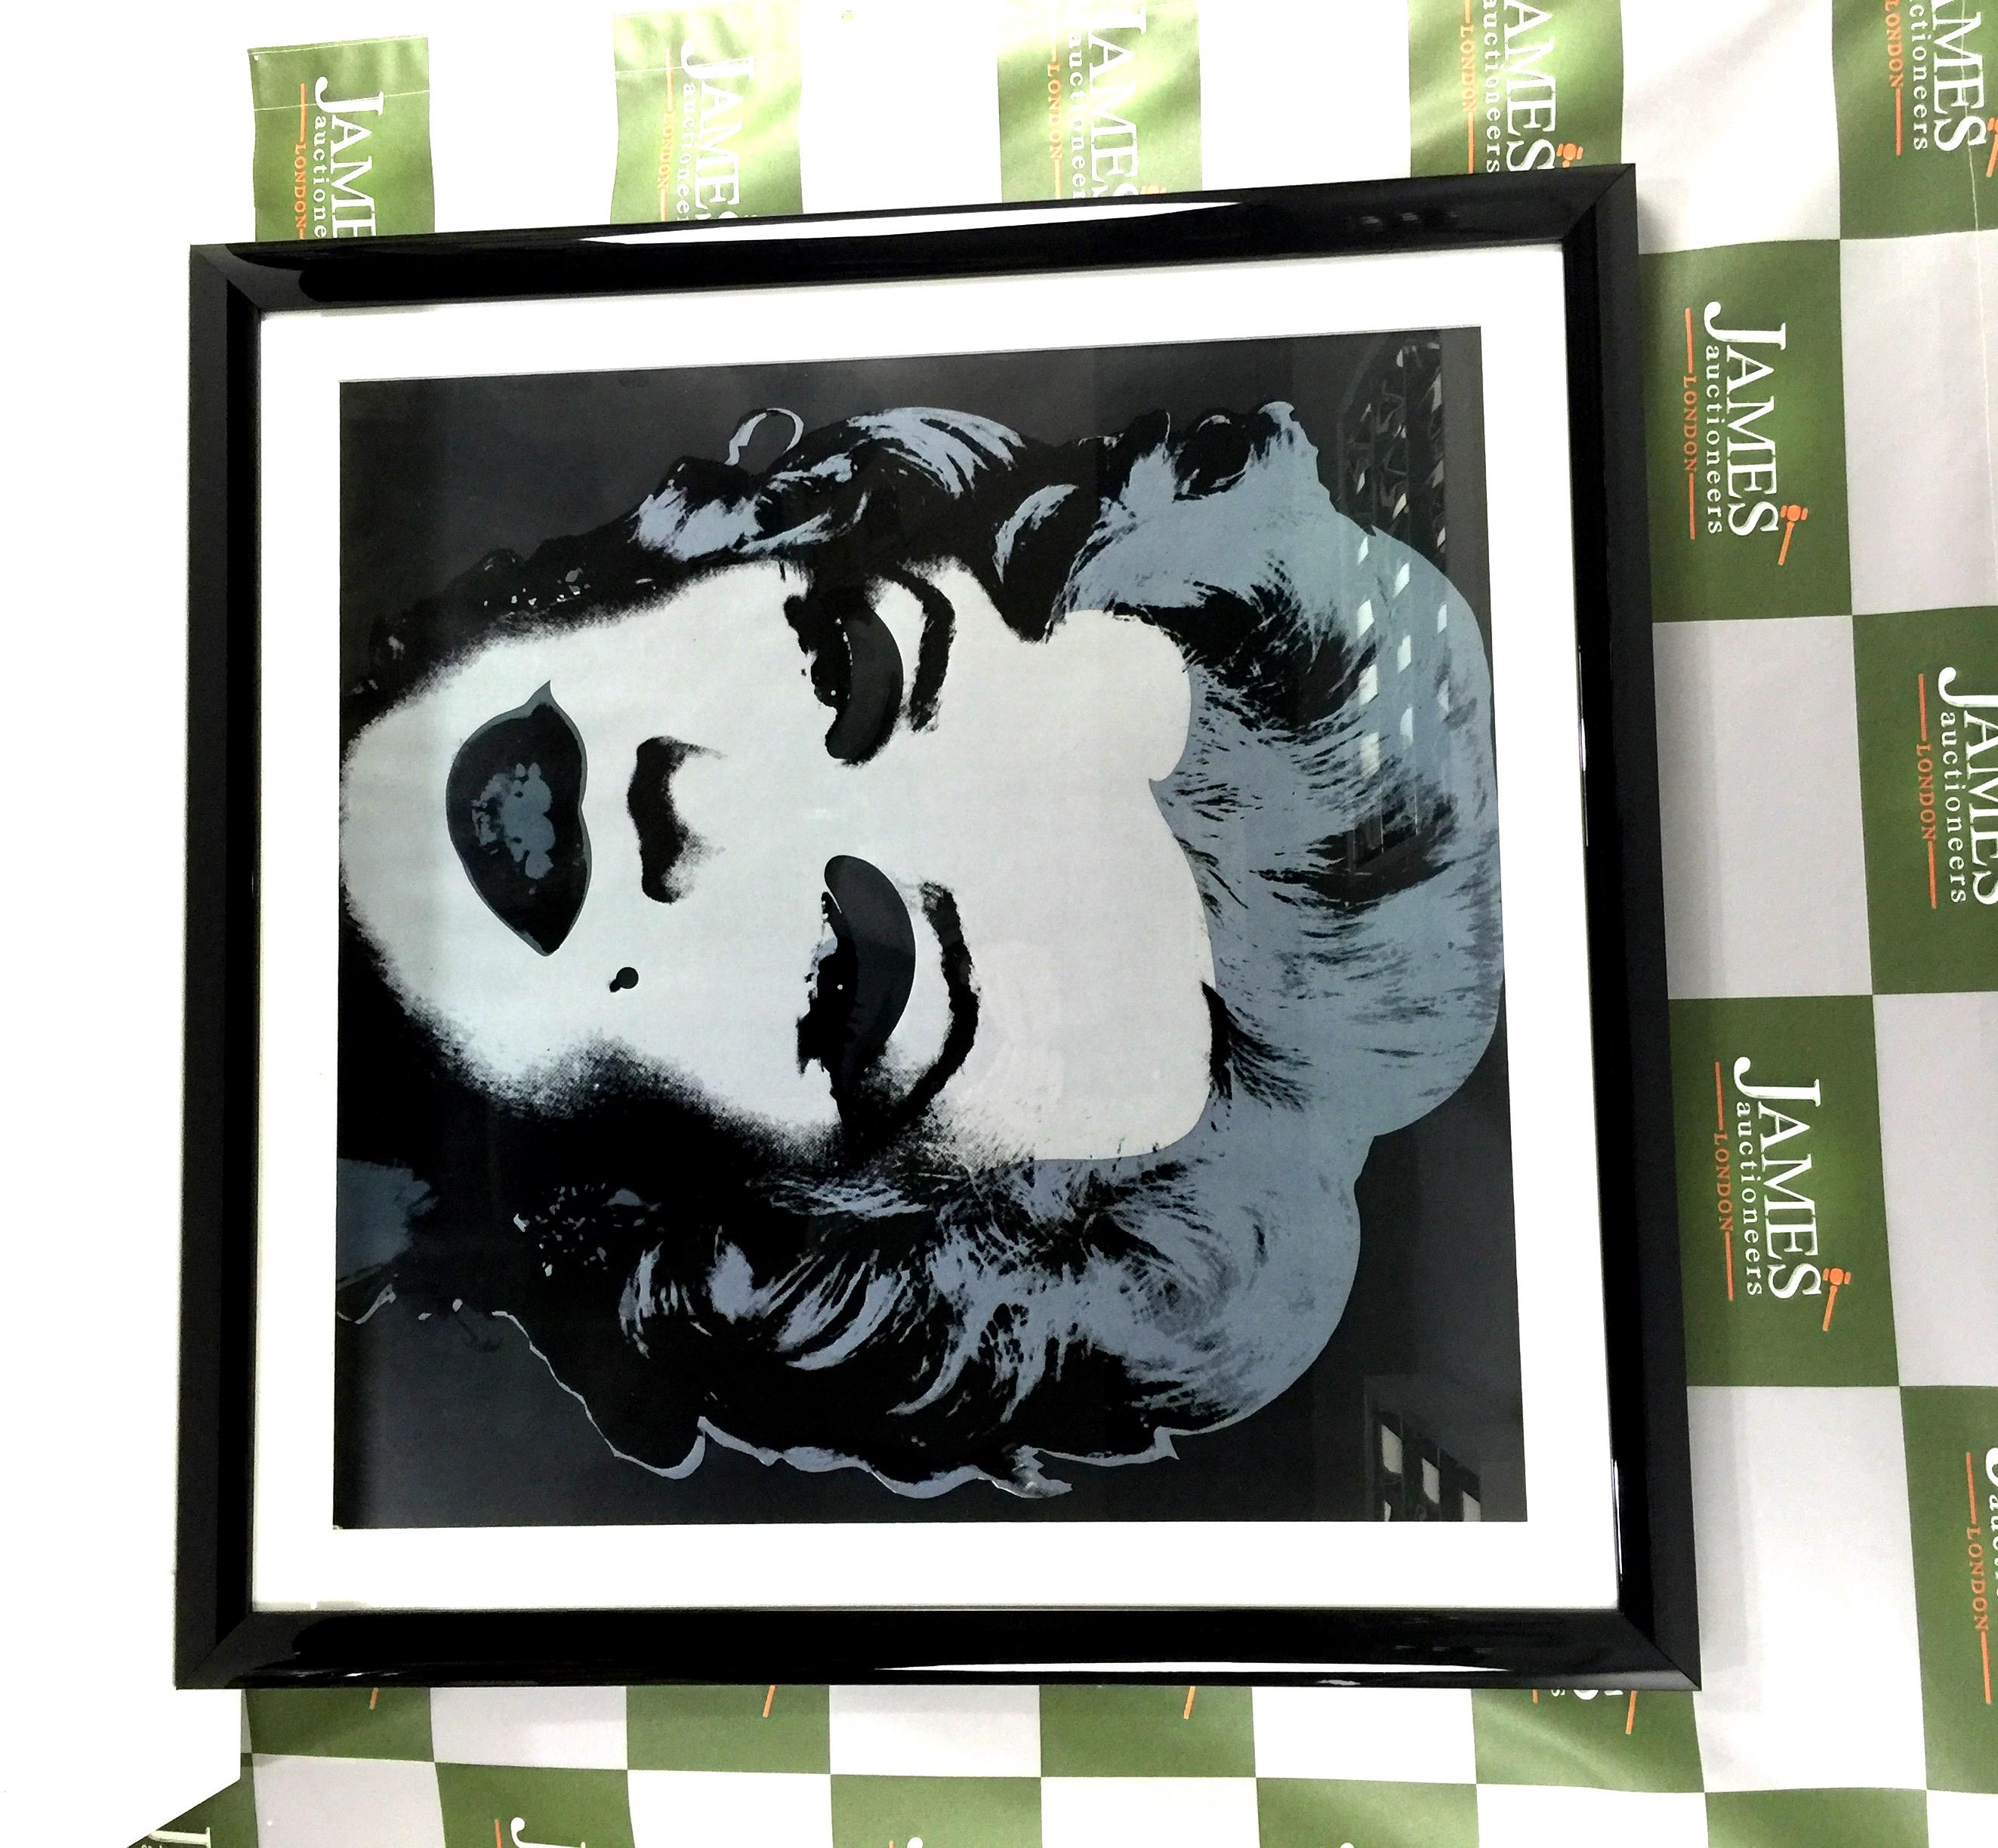 Andy Warhol 1987 Marilyn Monroe Large Lithograph 1676/2400 - Image 2 of 3